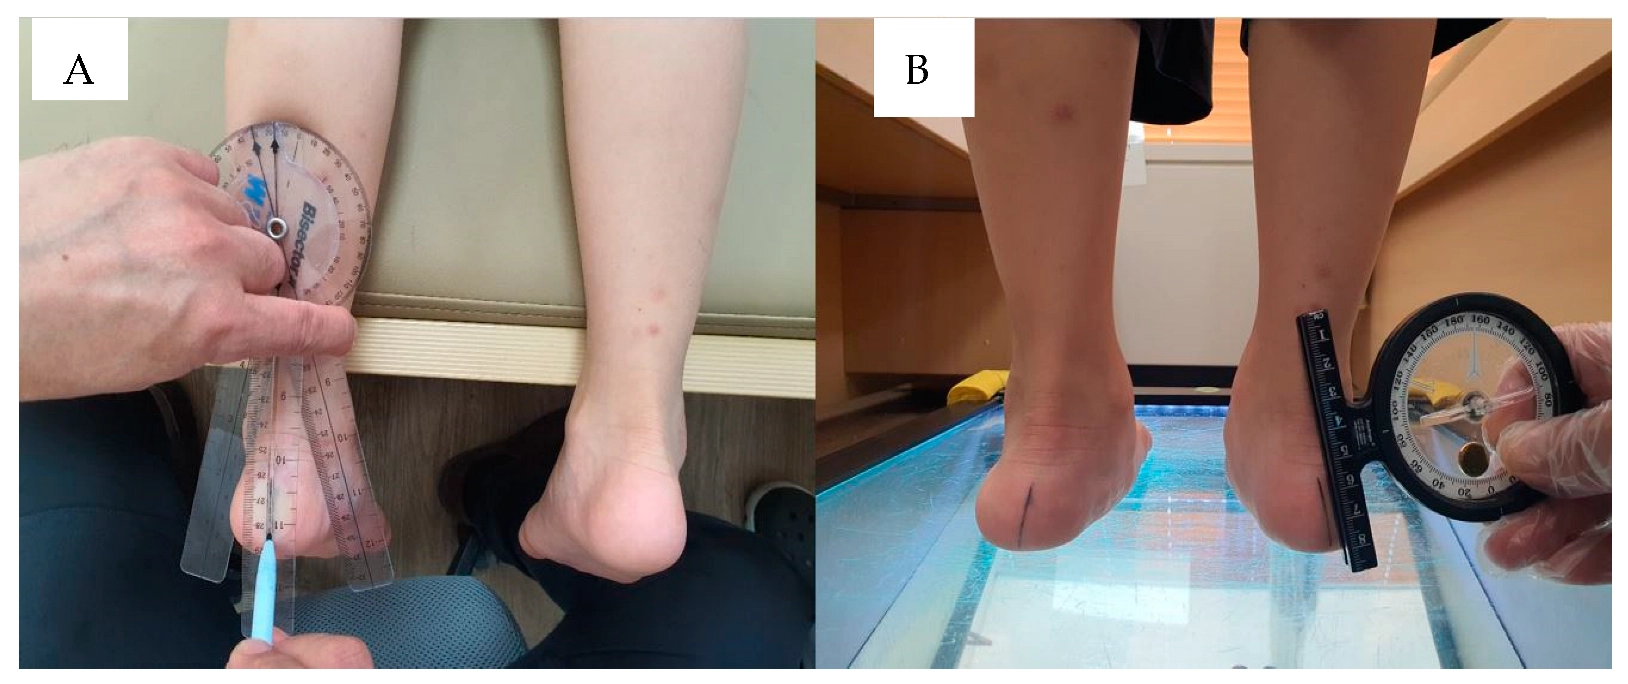 Prevention and Management of Flatfoot